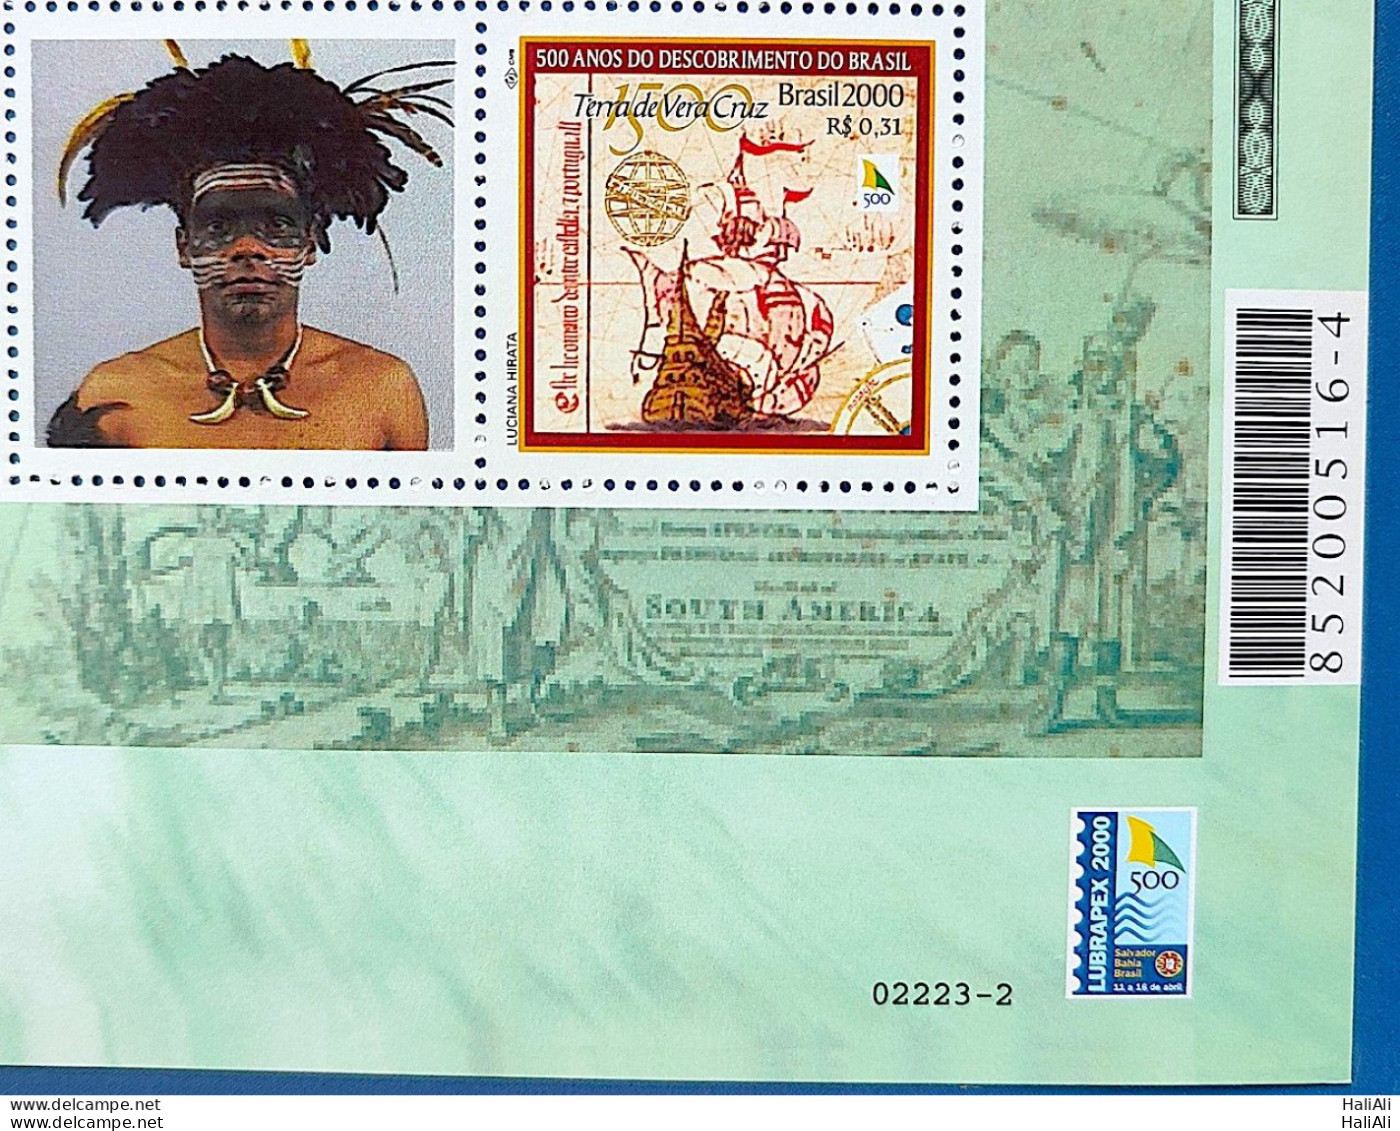 C 2254 Brazil Personalized Stamp Discovery Of Brazil Indian Ship Portugal 2000 Bar Code - Neufs